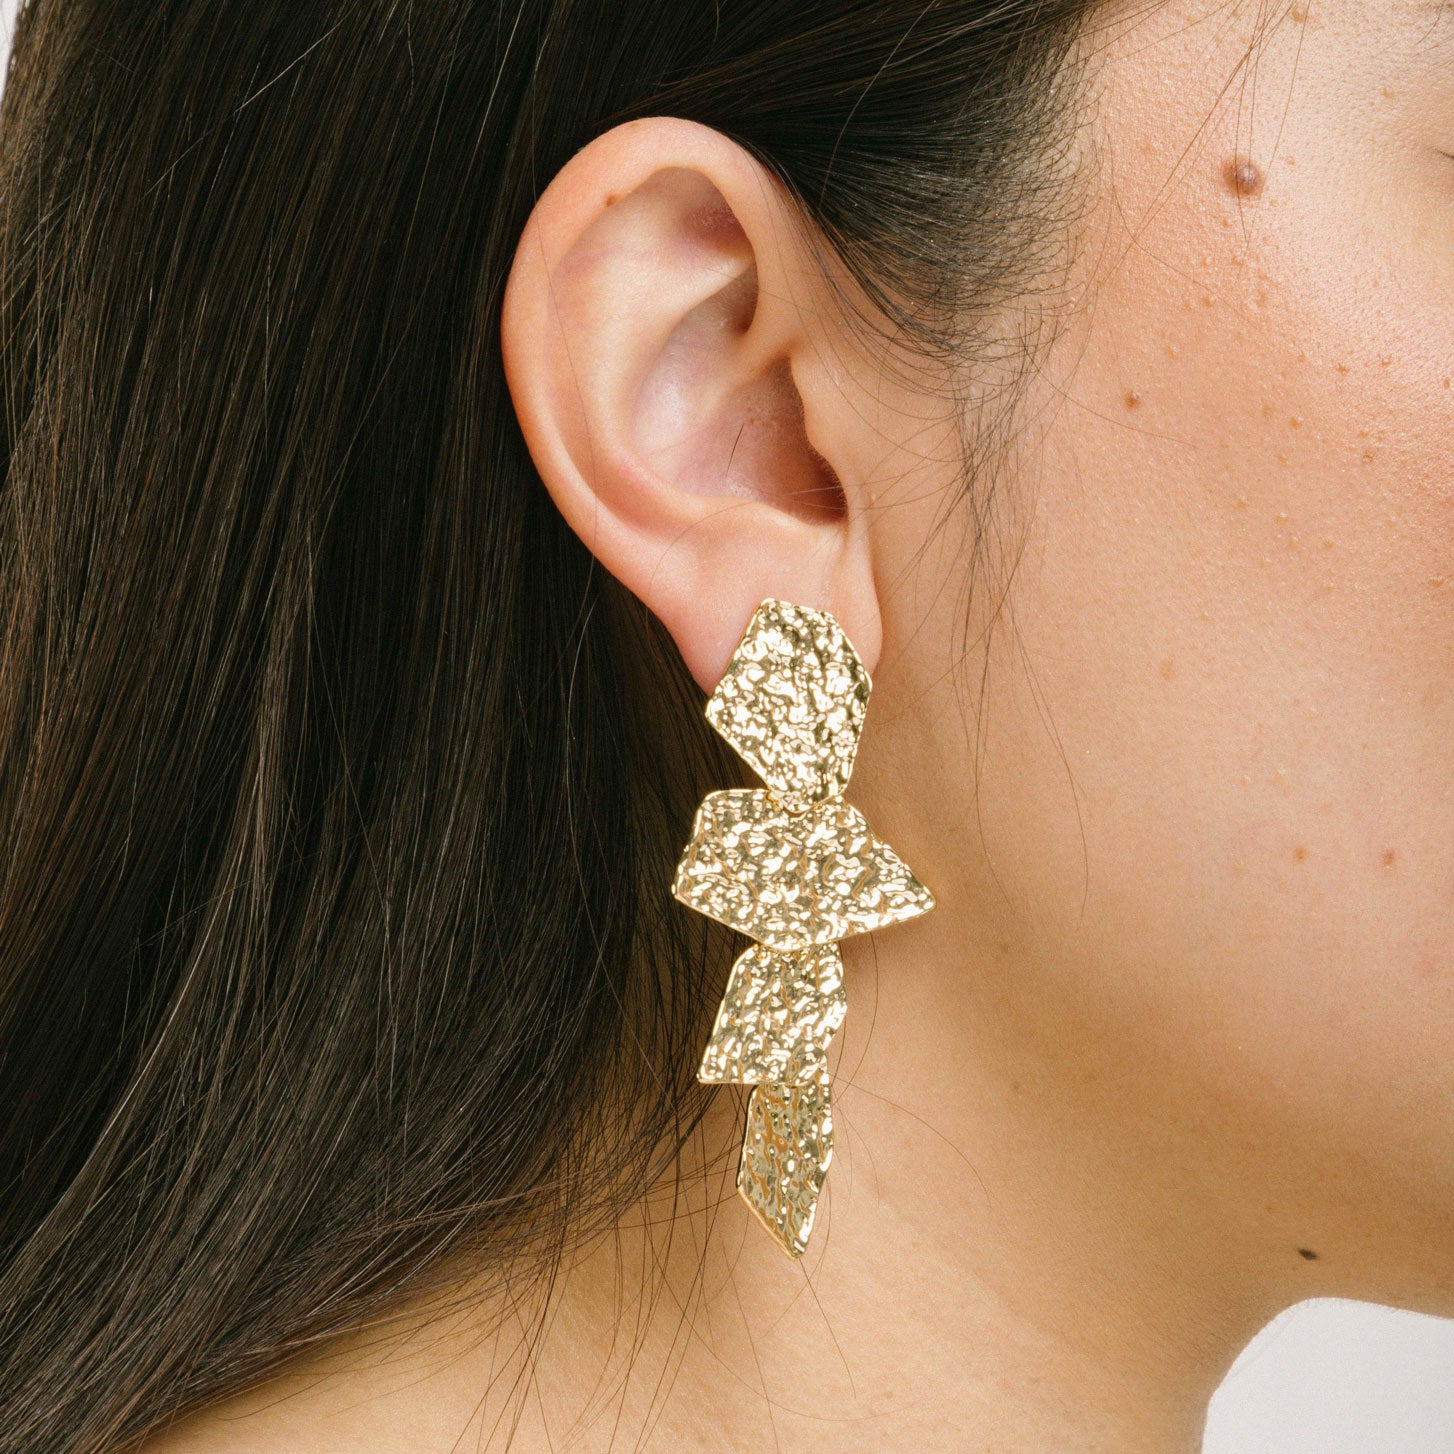 A model wearing the Manhattan Drop Clip On Earrings in Gold provide a secure and comfortable fit for any ear type. The padded clip-on design features a zinc and copper alloy construction, and lasts approximately 8-12 hours. As the earring pairs are non-adjustable, each purchase contains a single pair.